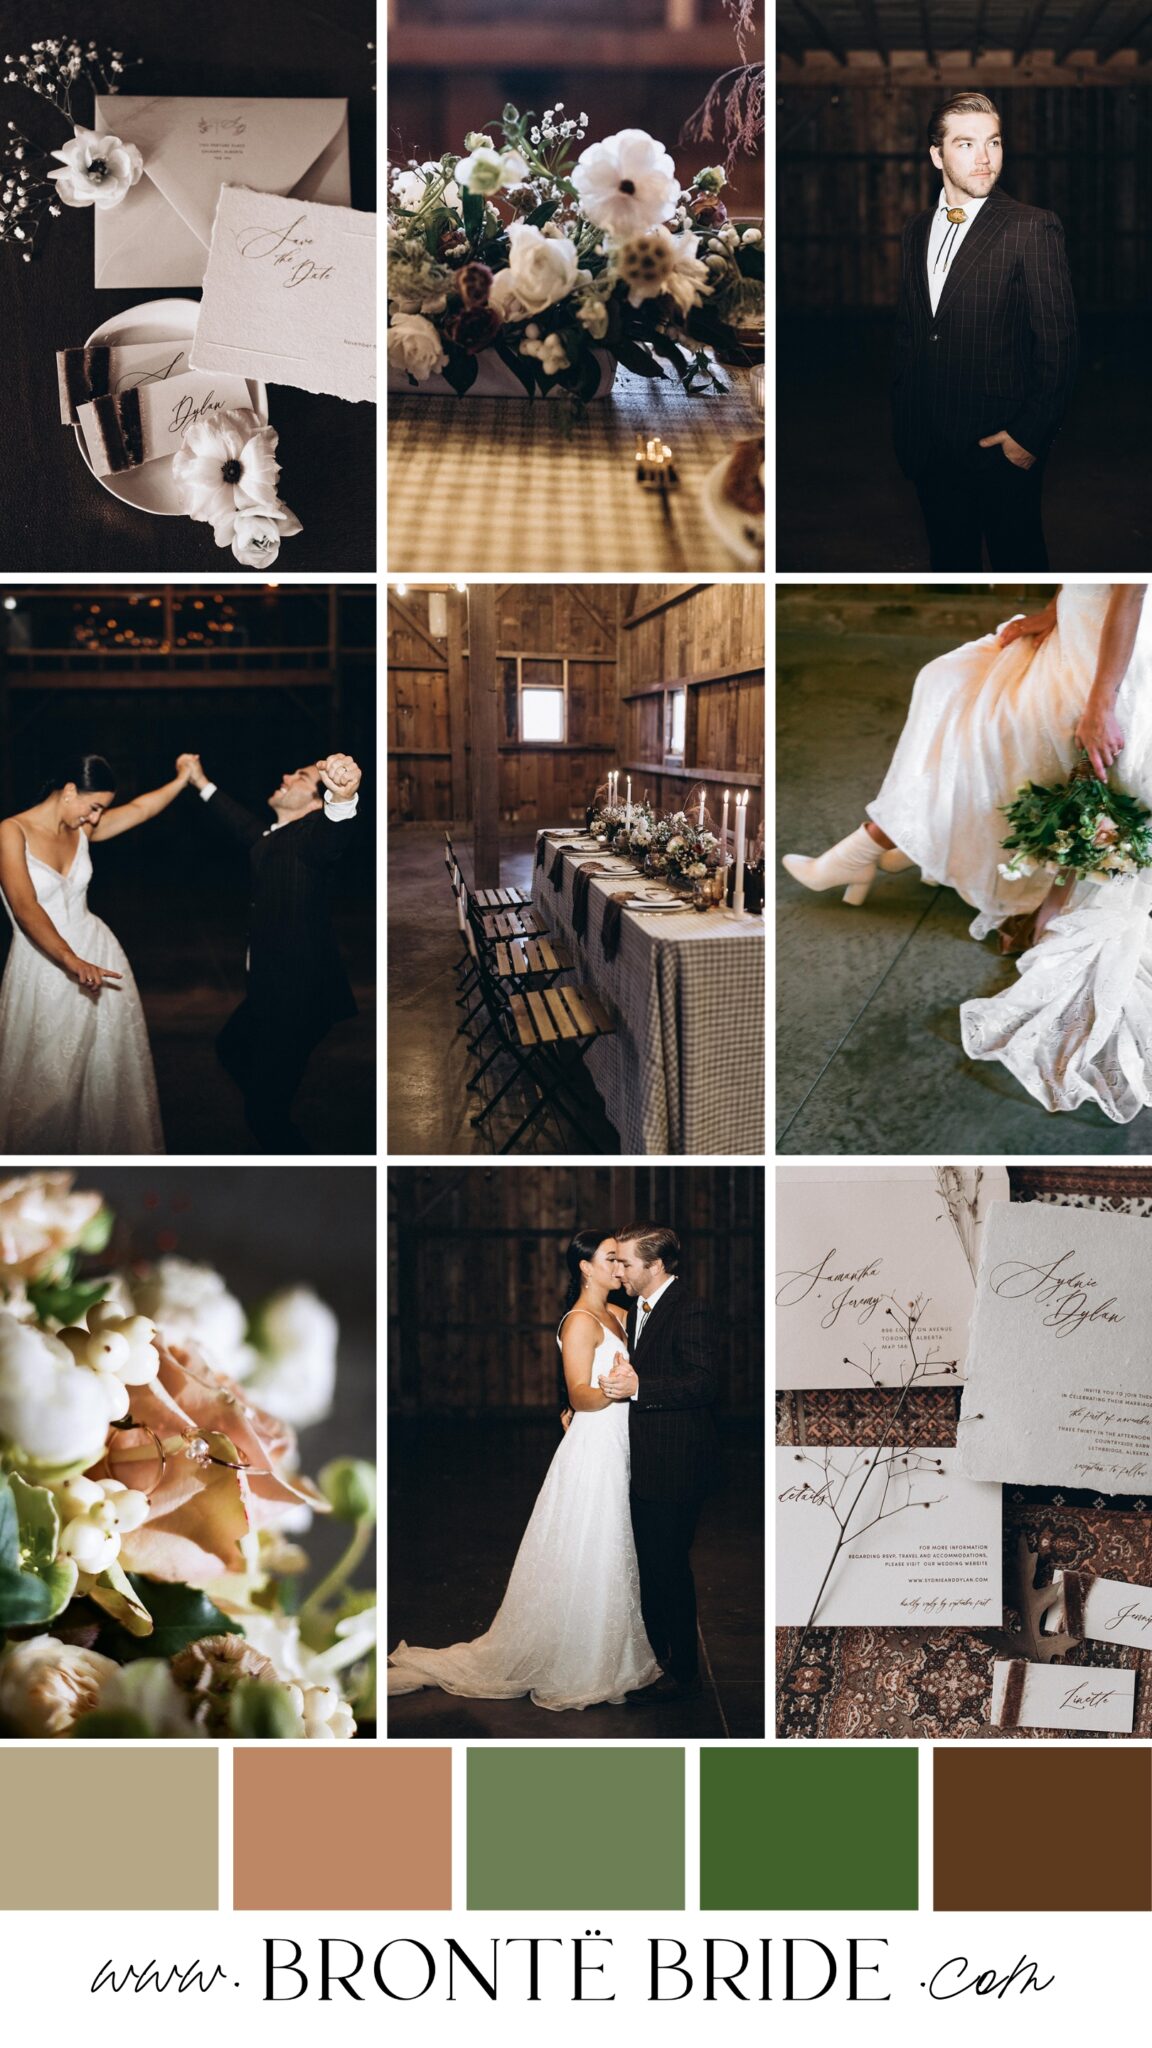 Country Chic Wedding Inspiration & Colour Palette Ideas | Wedding Inspiration & Mood Board from the Bronte Bride Blog; Winter wedding inspiration in Alberta with a romantic colour palette of dusty rose, green, taupe and warm brown. 